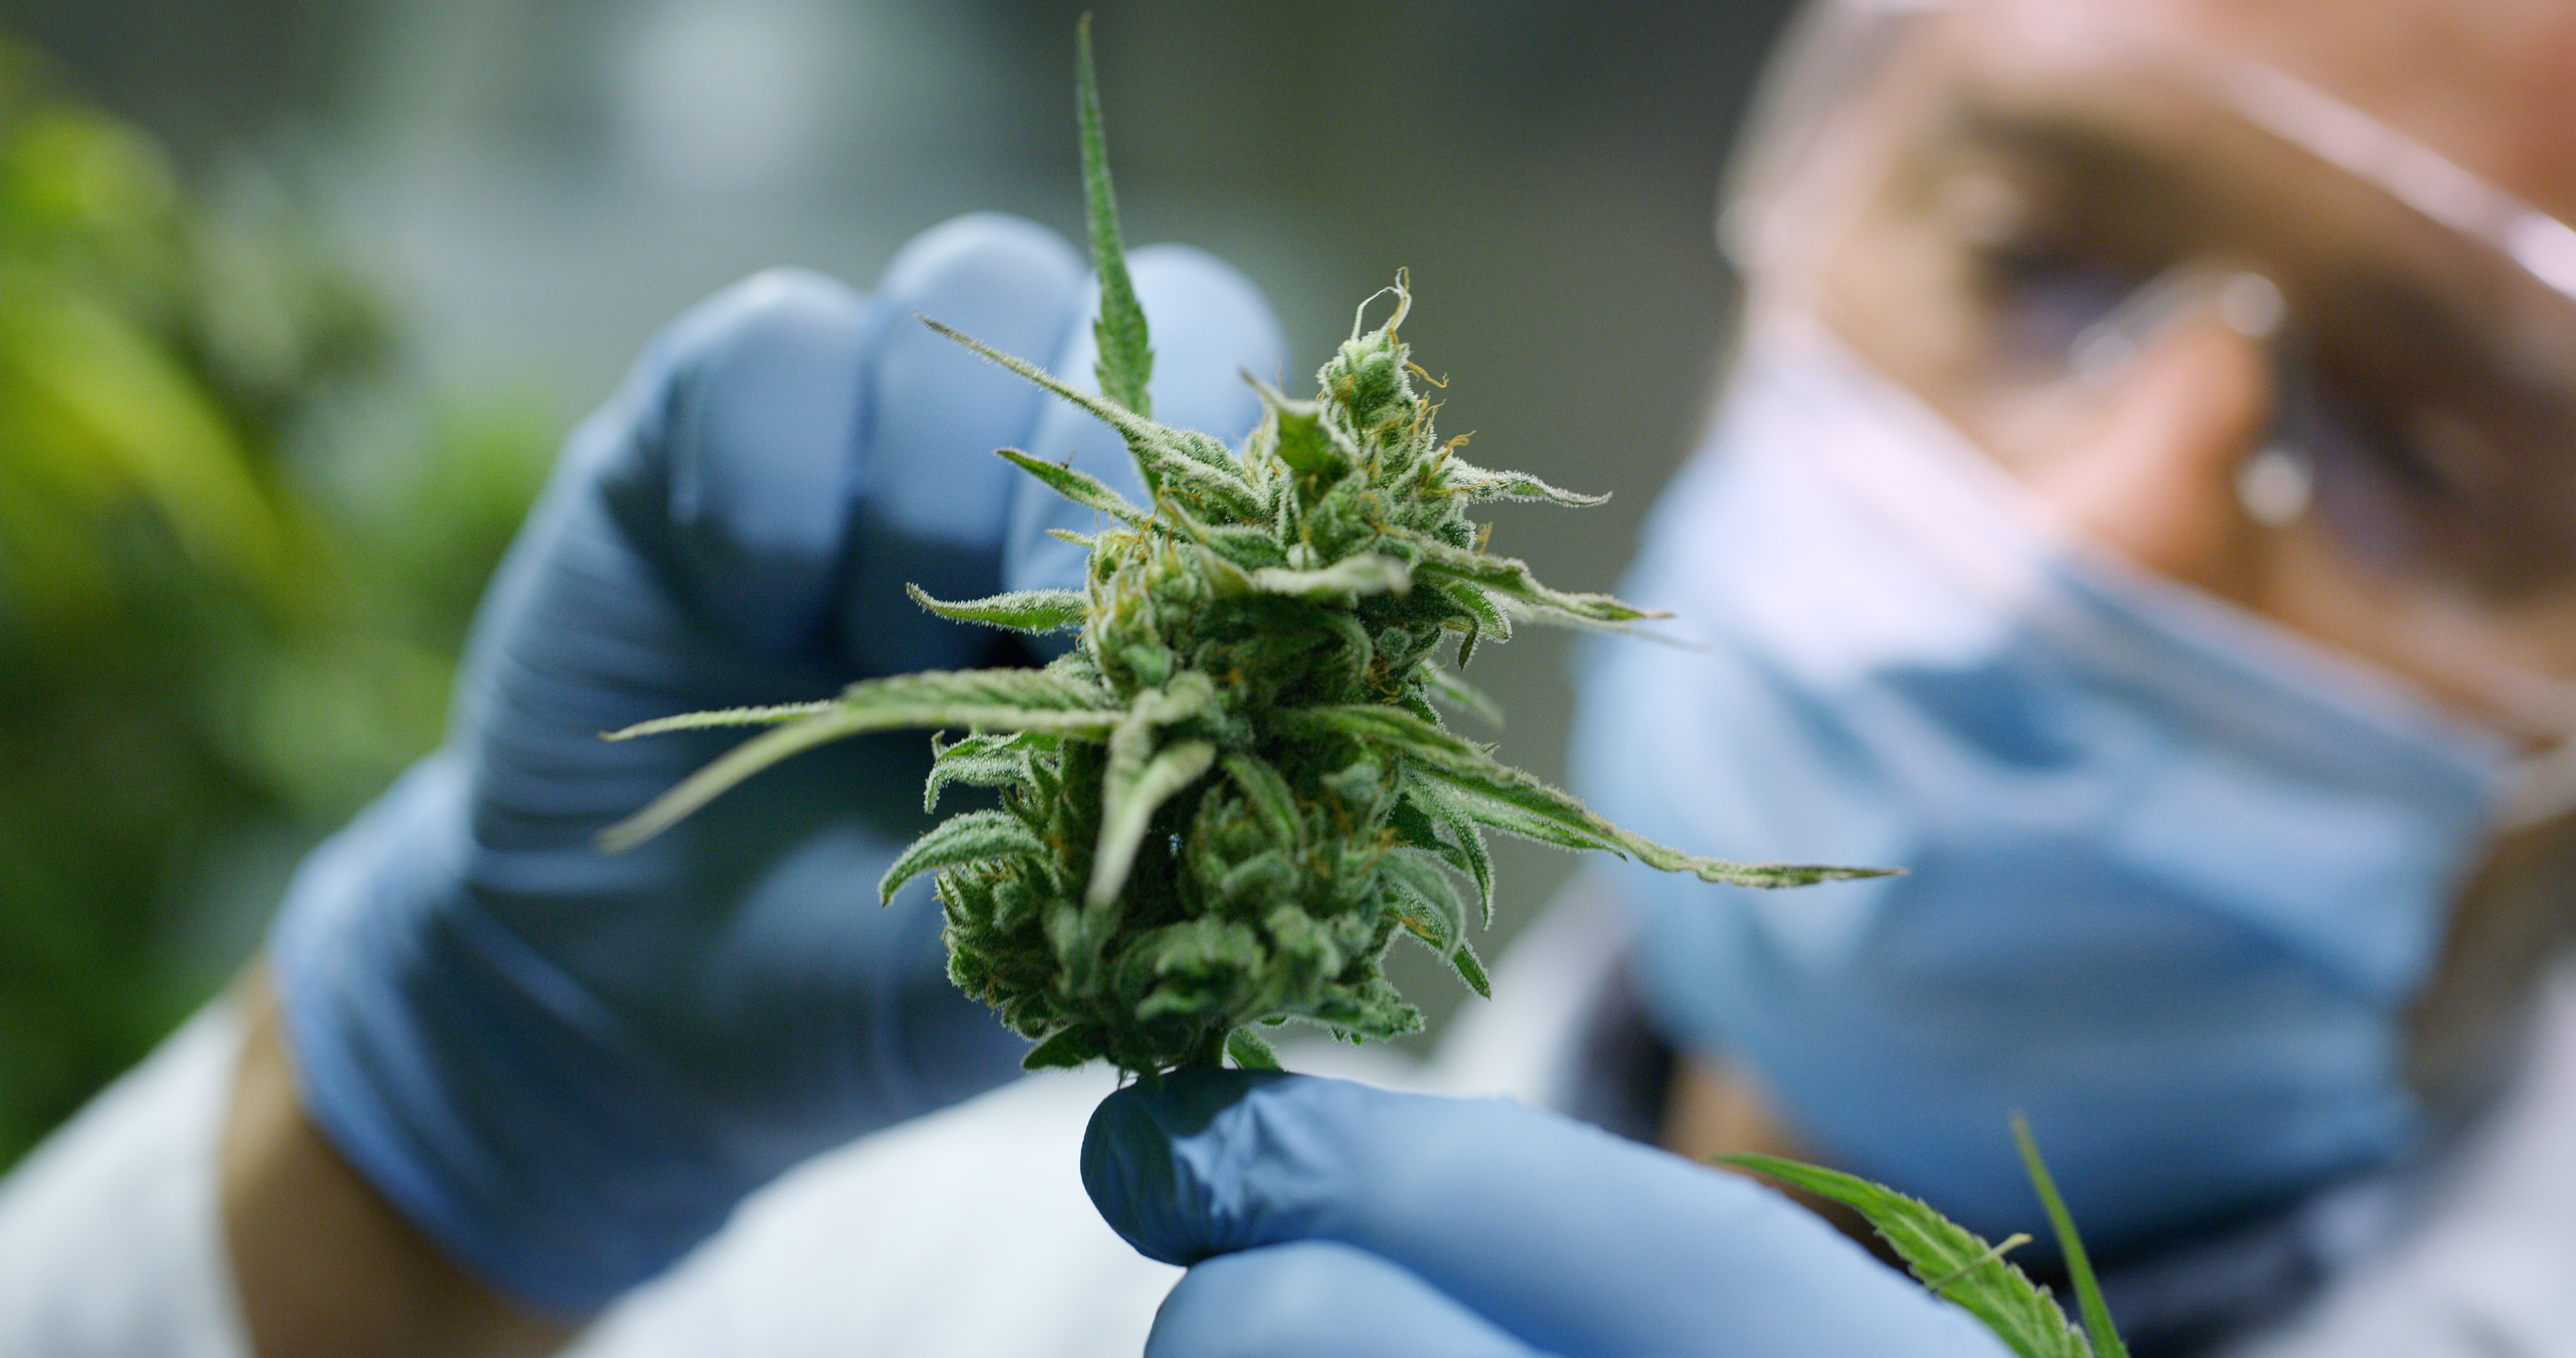 Science behind cannabis and hemp is ever growing. With cannabinoids applications on the rise, it's exciting to see how this might impact careers, patients, students, and anyone interested in the industry.